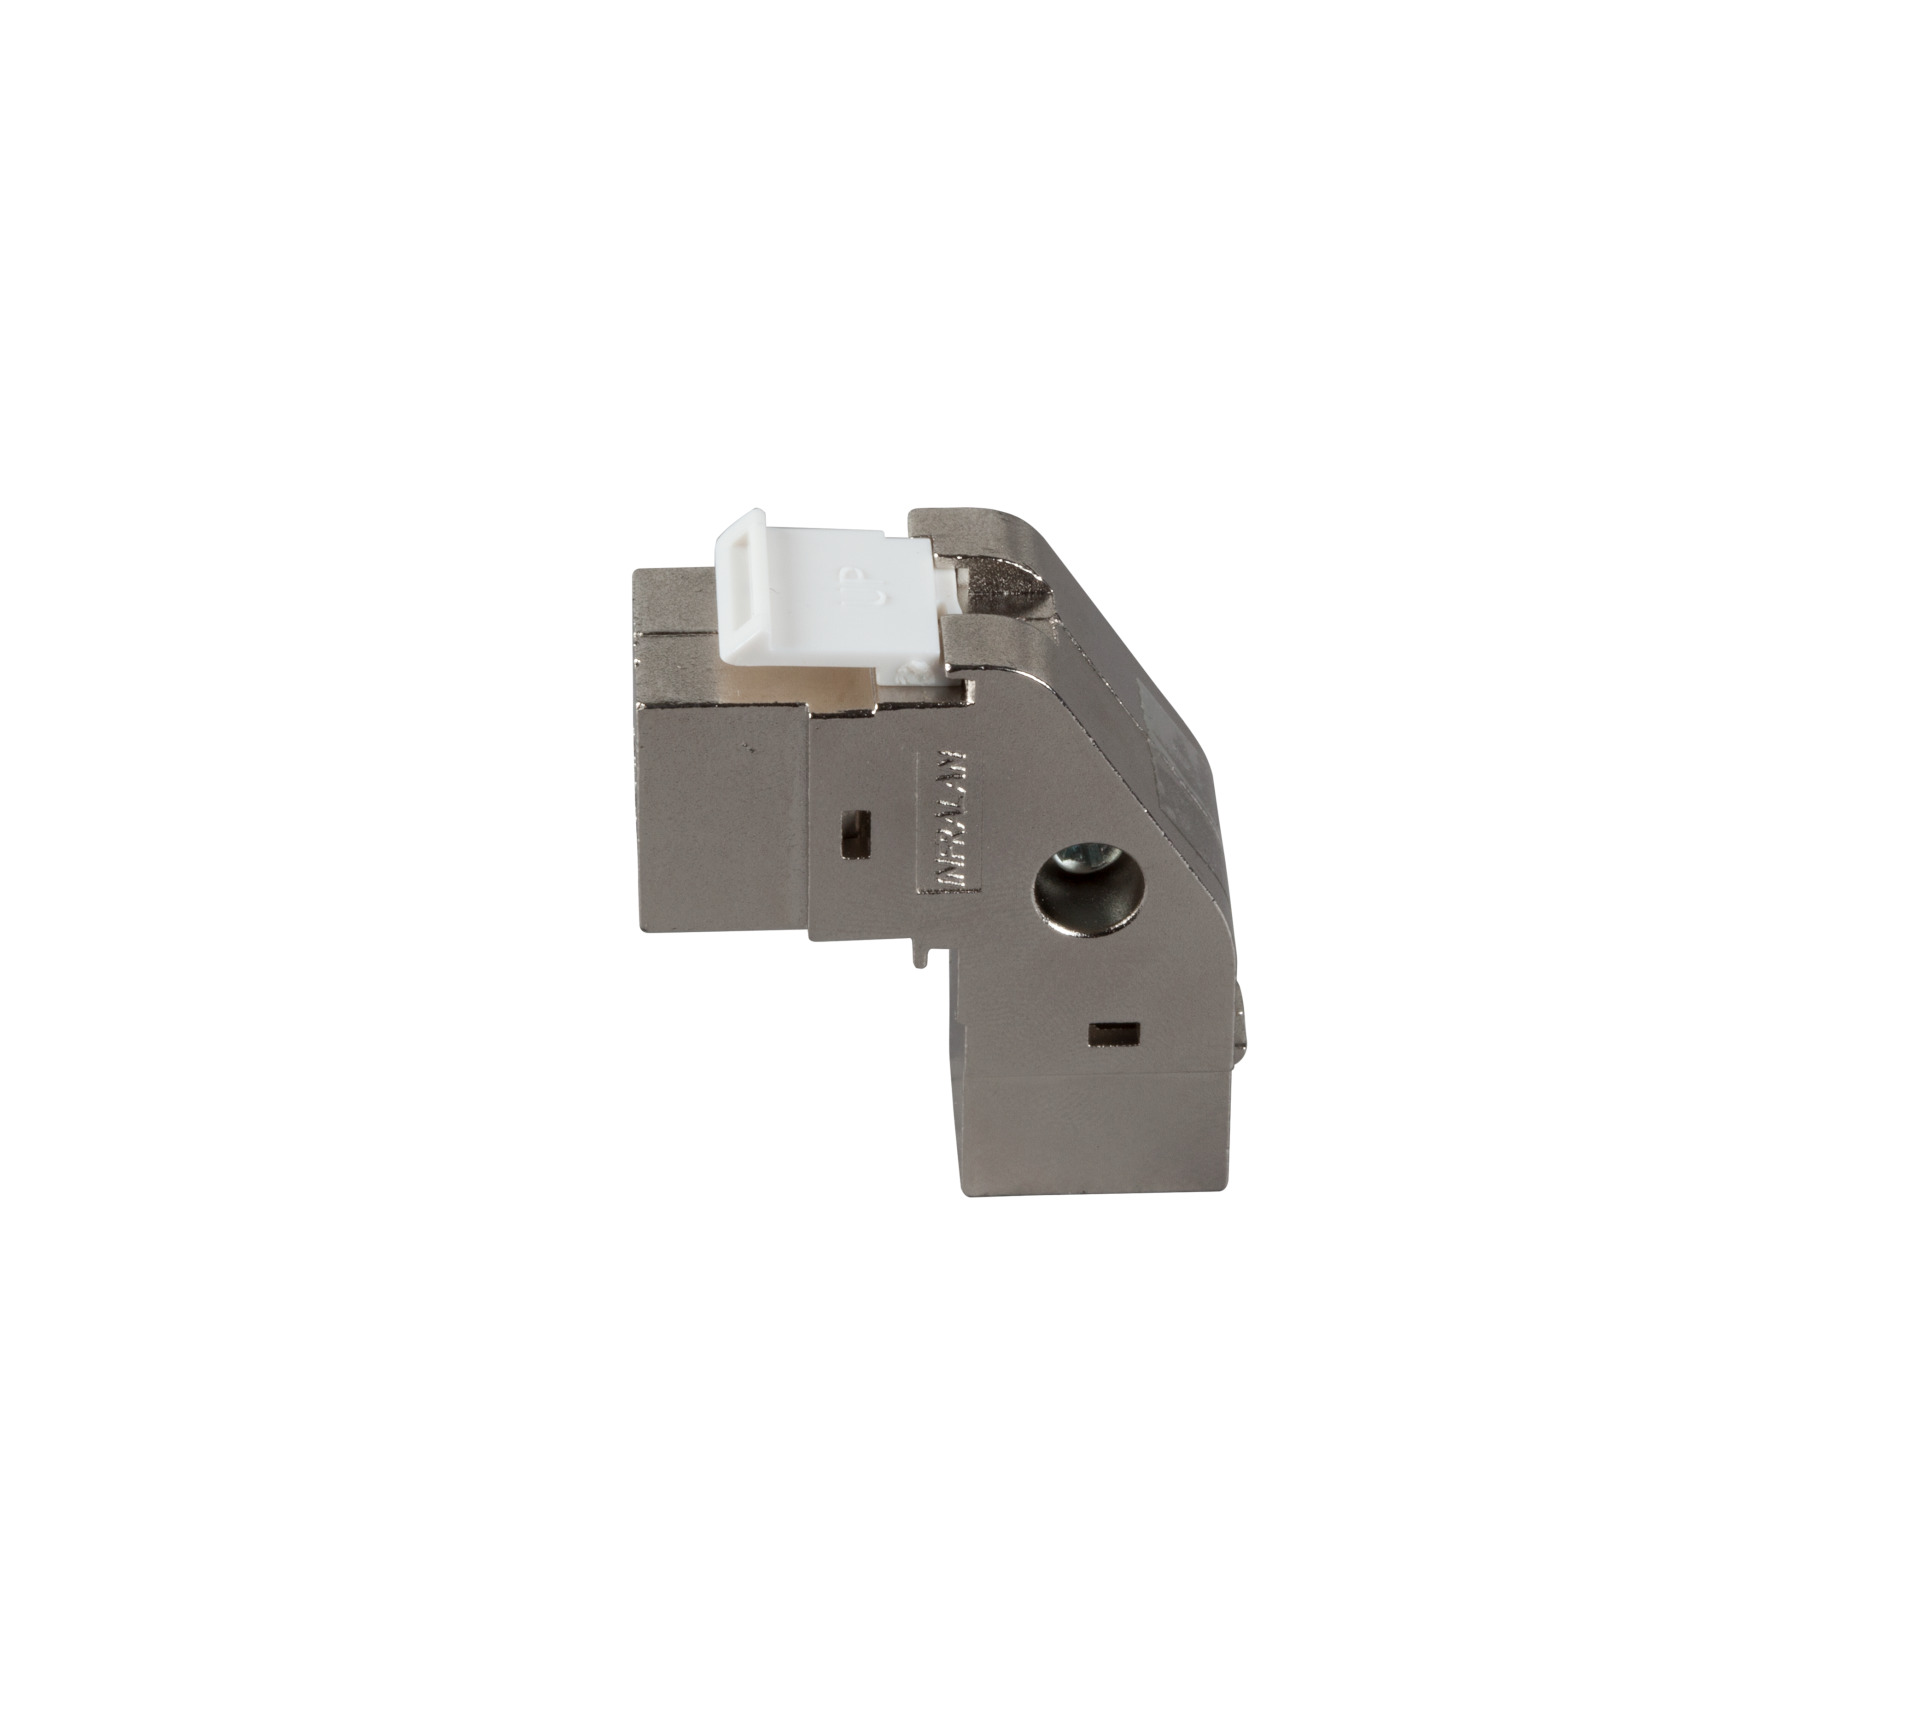 Keystone Snap-In Adapter RJ45 STP, Cat.6A, 90° angled